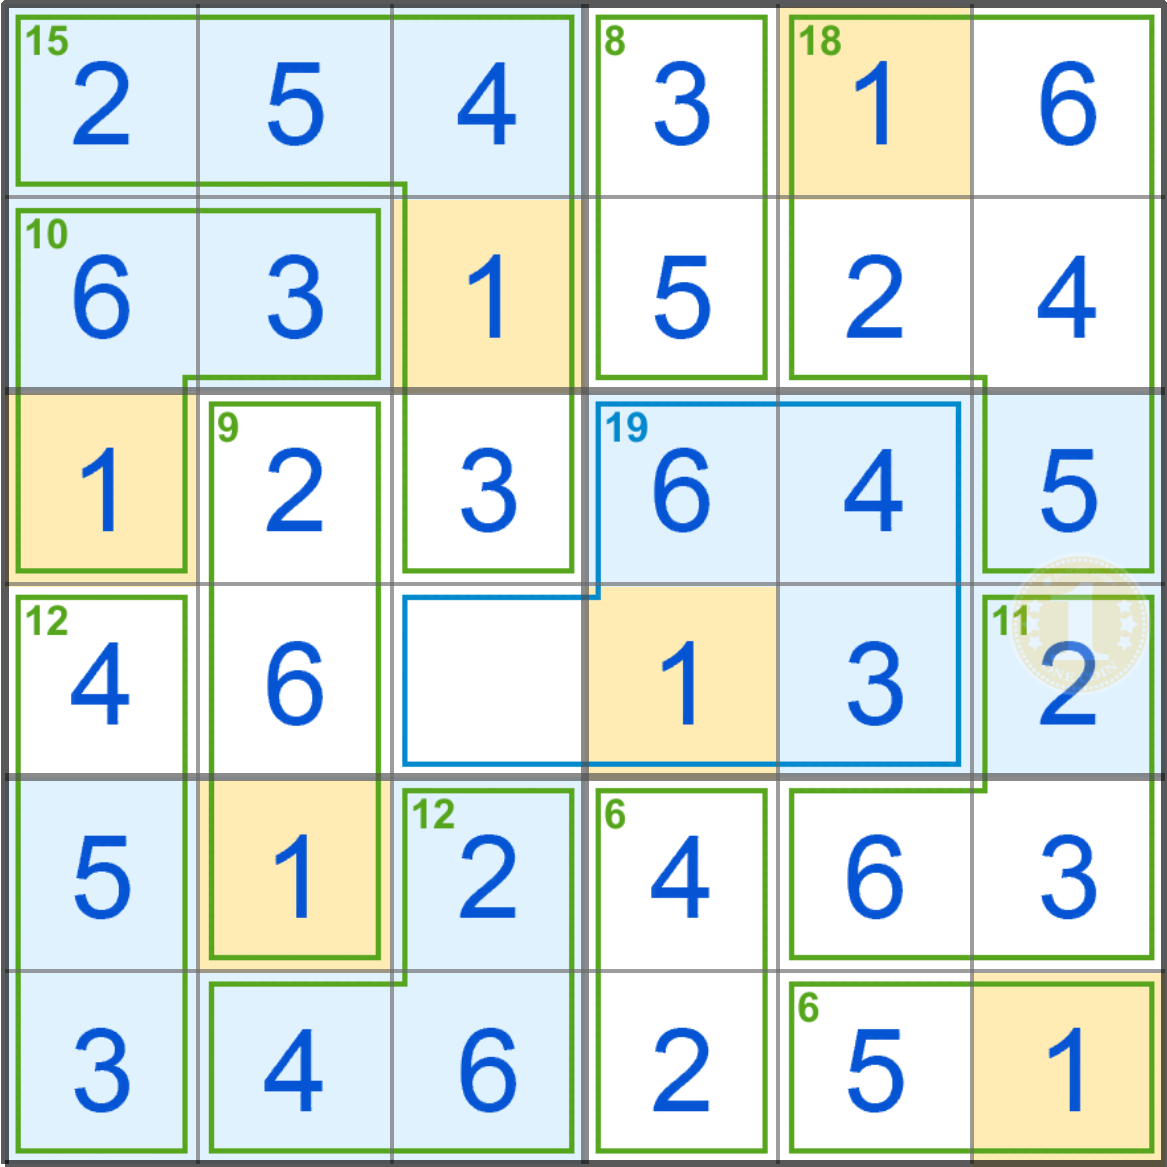 Puzzle Page Killer Sudoku March 6 2021 Answers PuzzlePageAnswers net